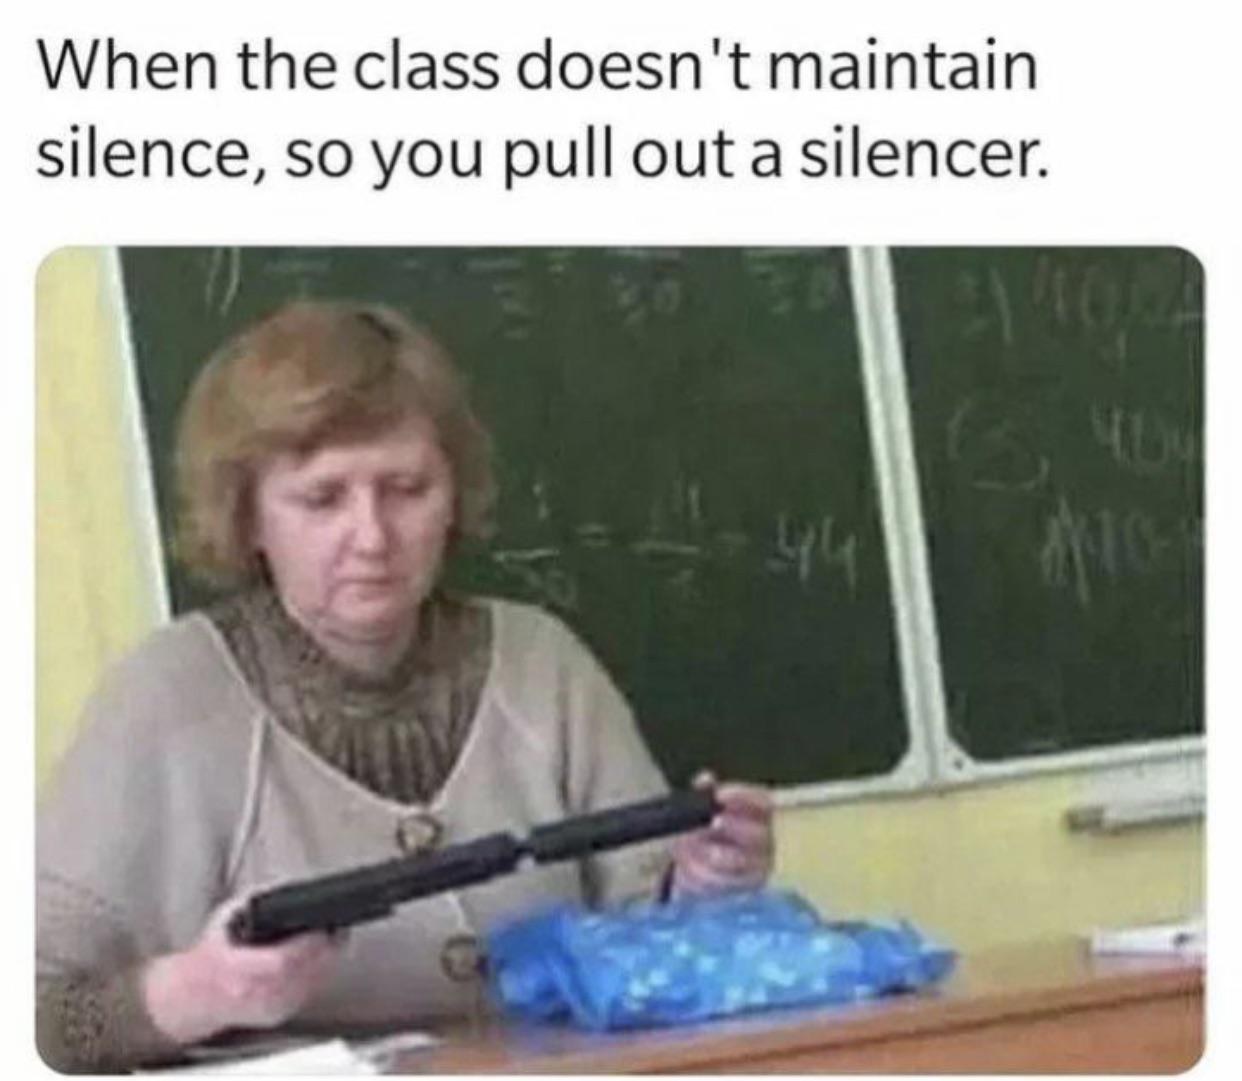 library is too loud - When the class doesn't maintain silence, so you pull out a silencer.